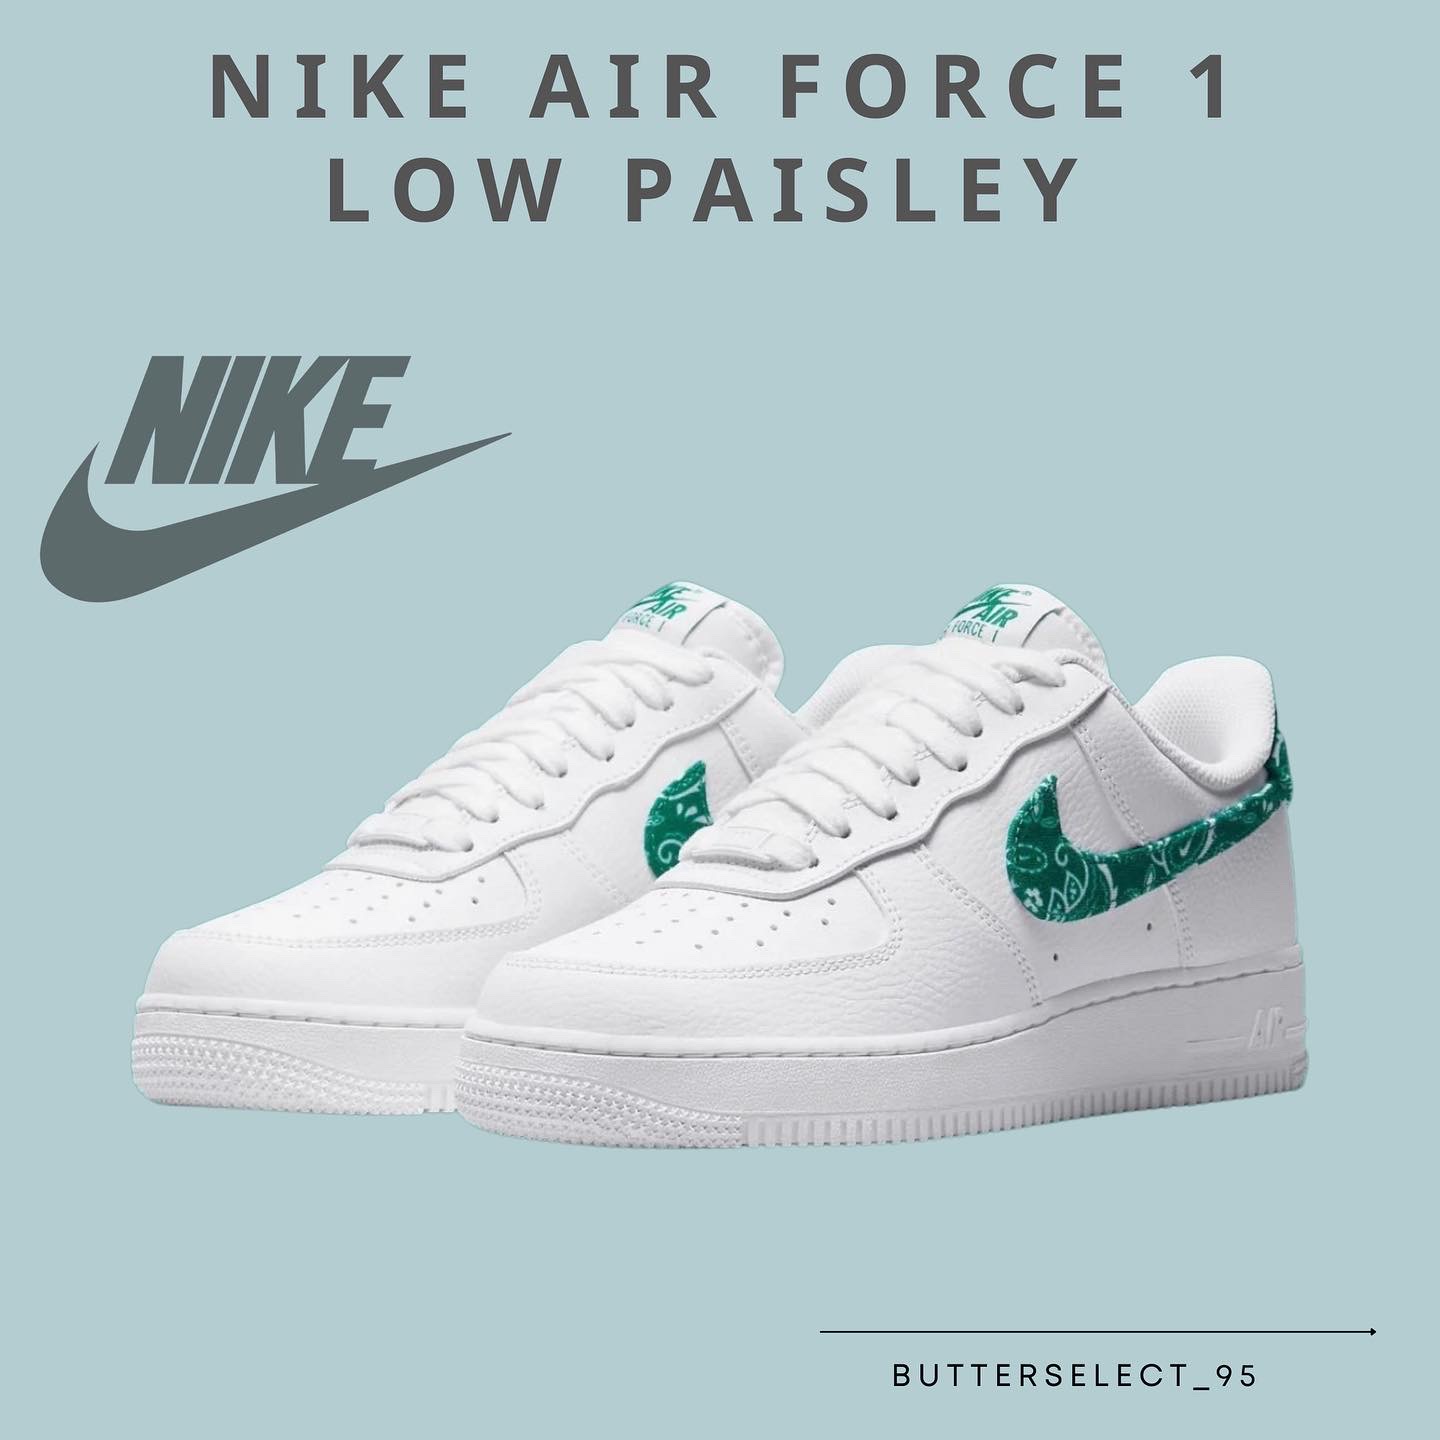 Nike Air Force 1 Low Paisley 變形蟲